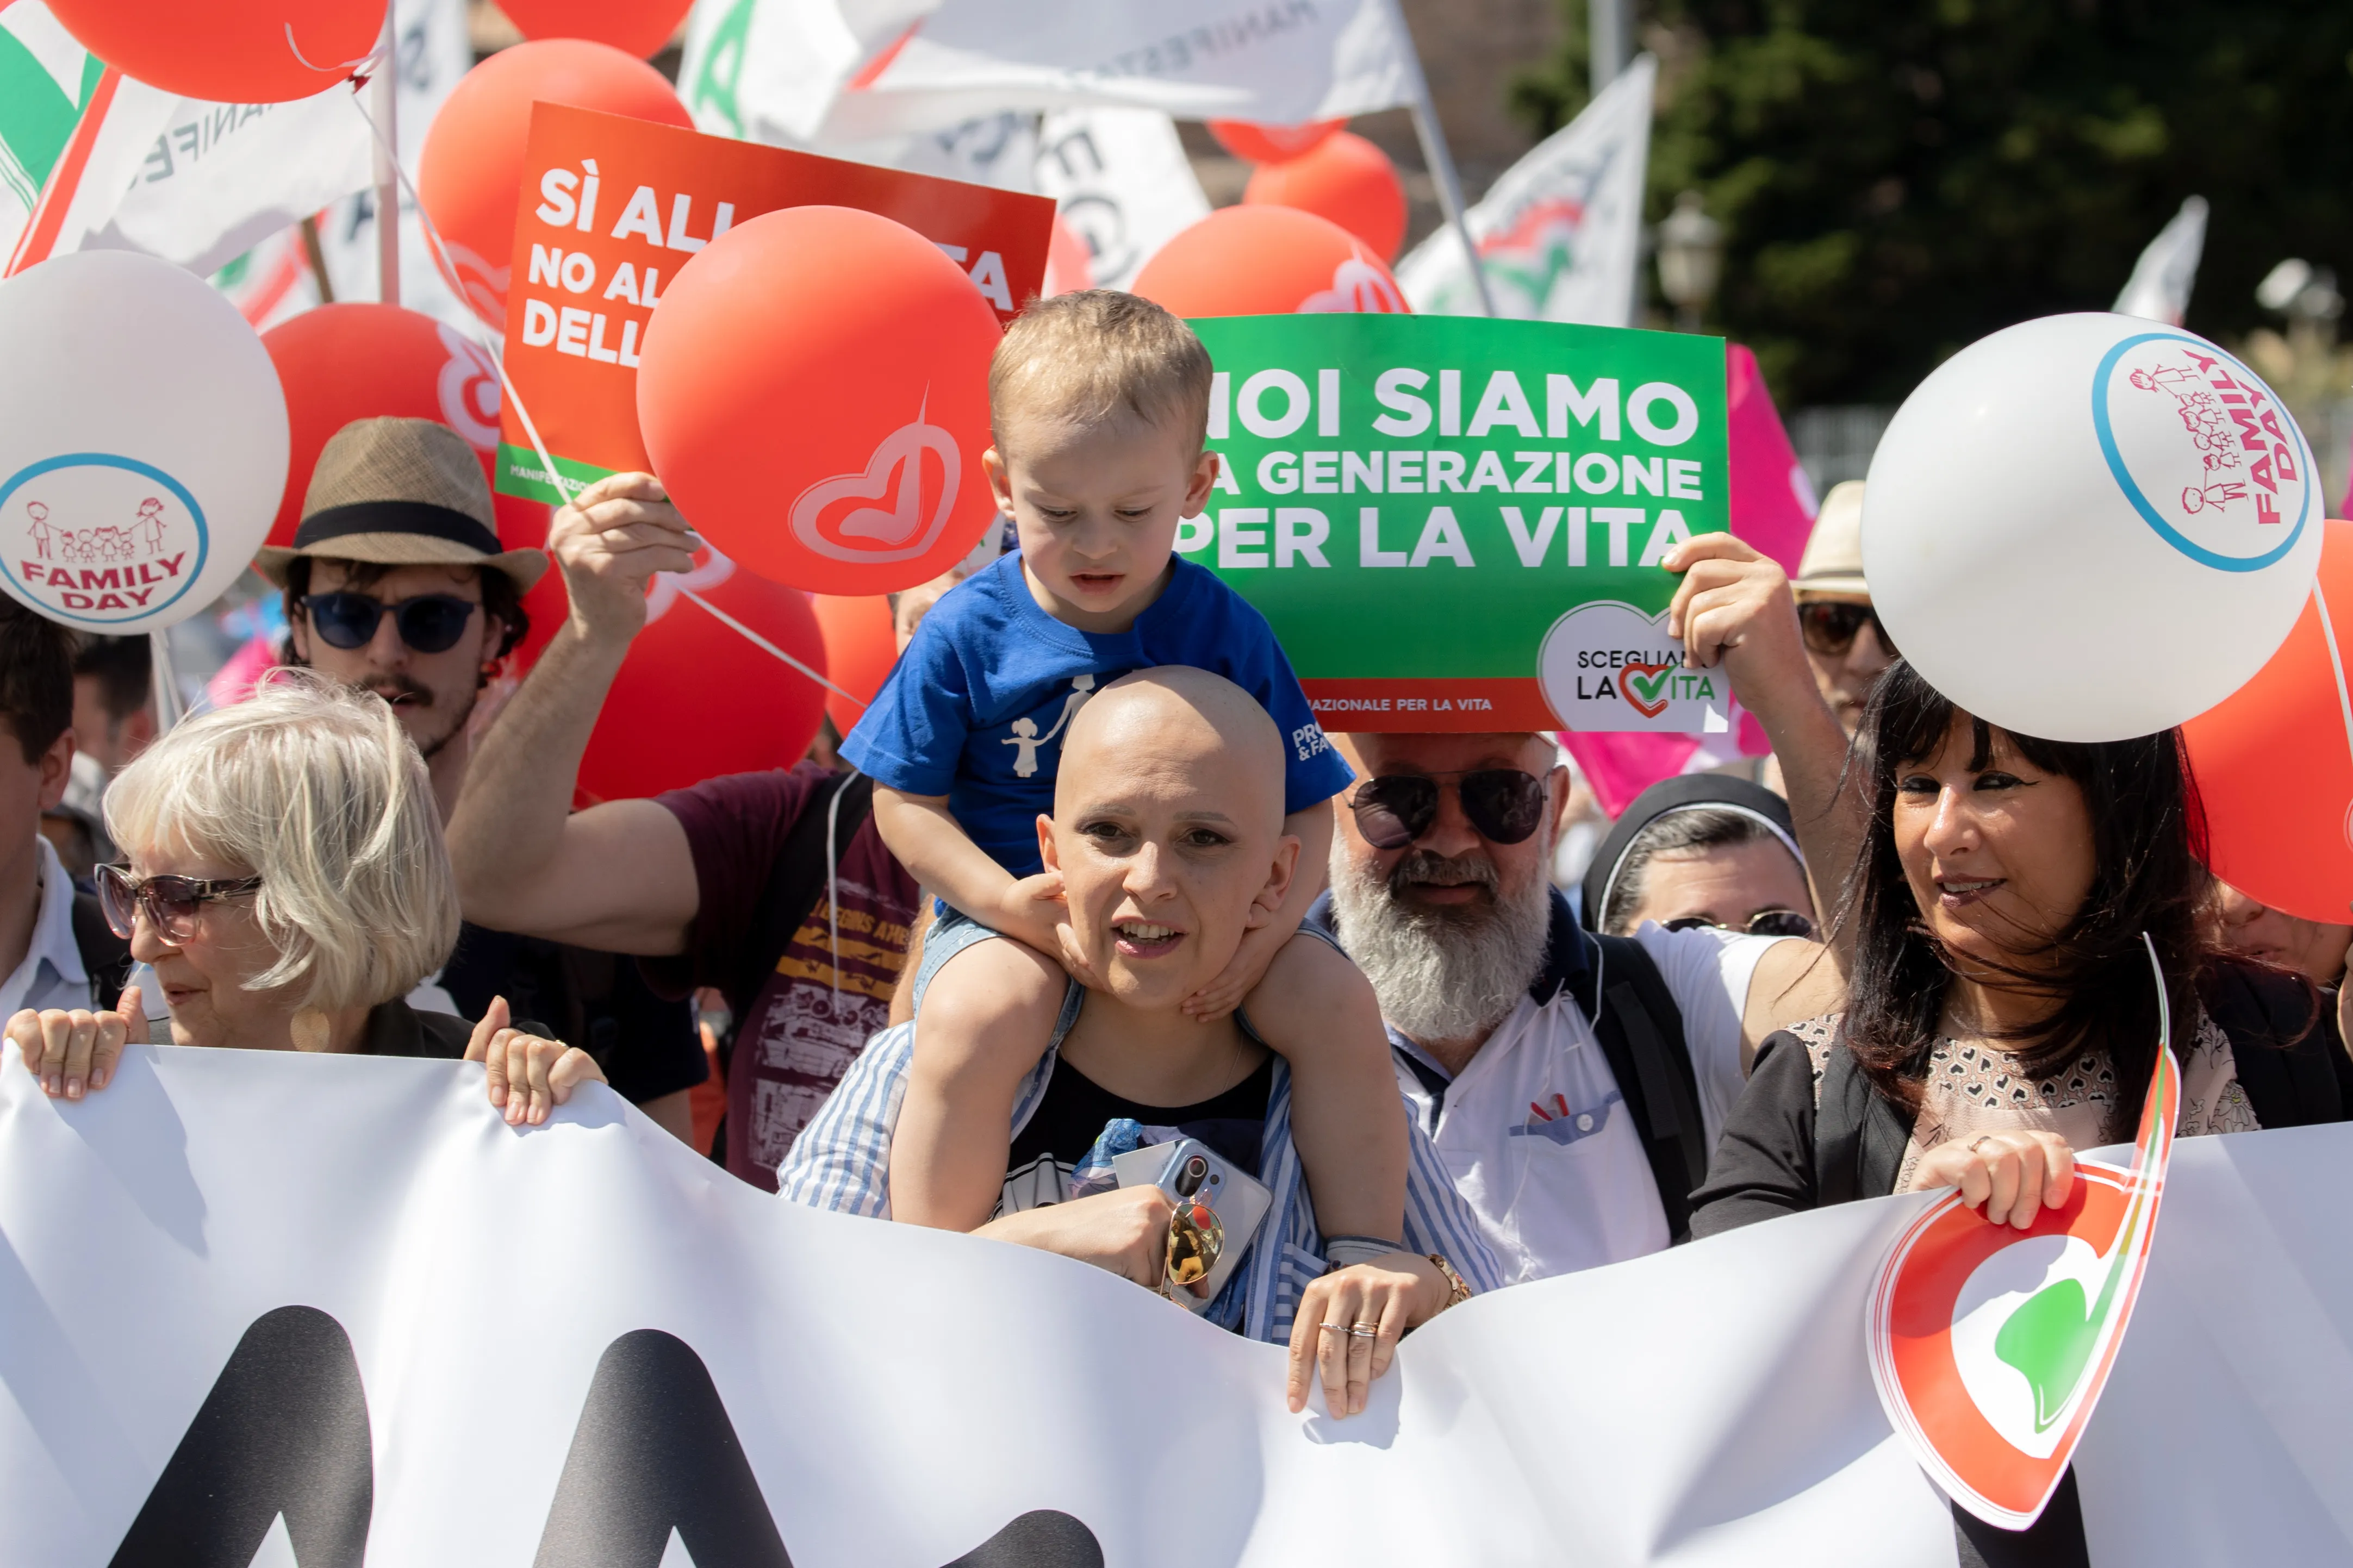 Participants in Italy's pro-life demonstration in Rome on May 21, 2022.?w=200&h=150